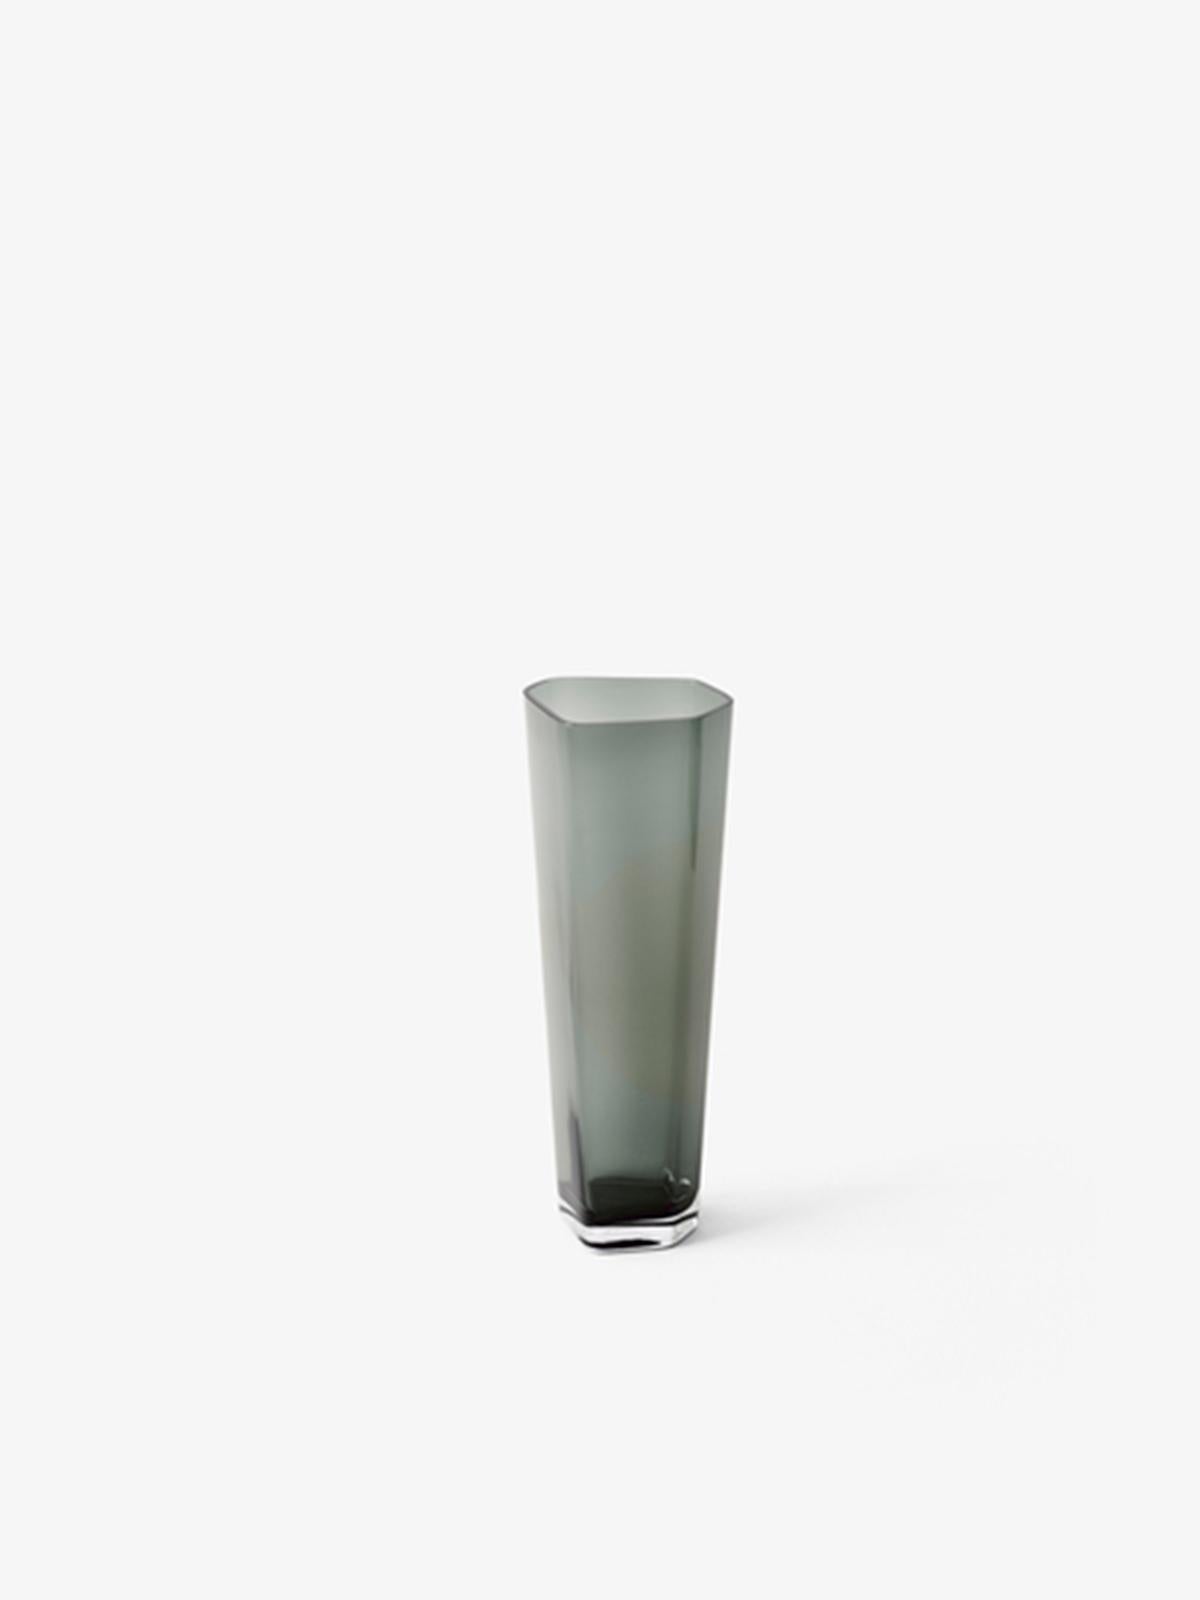 Designed by Space Copenhagen, this Smoked vase sits within the Collect series, a curated line of beautifully crafted soft furnishings and home objects.
Each vase is uniquely made from mouth blown glass in a fixed mould, which ensures the curved